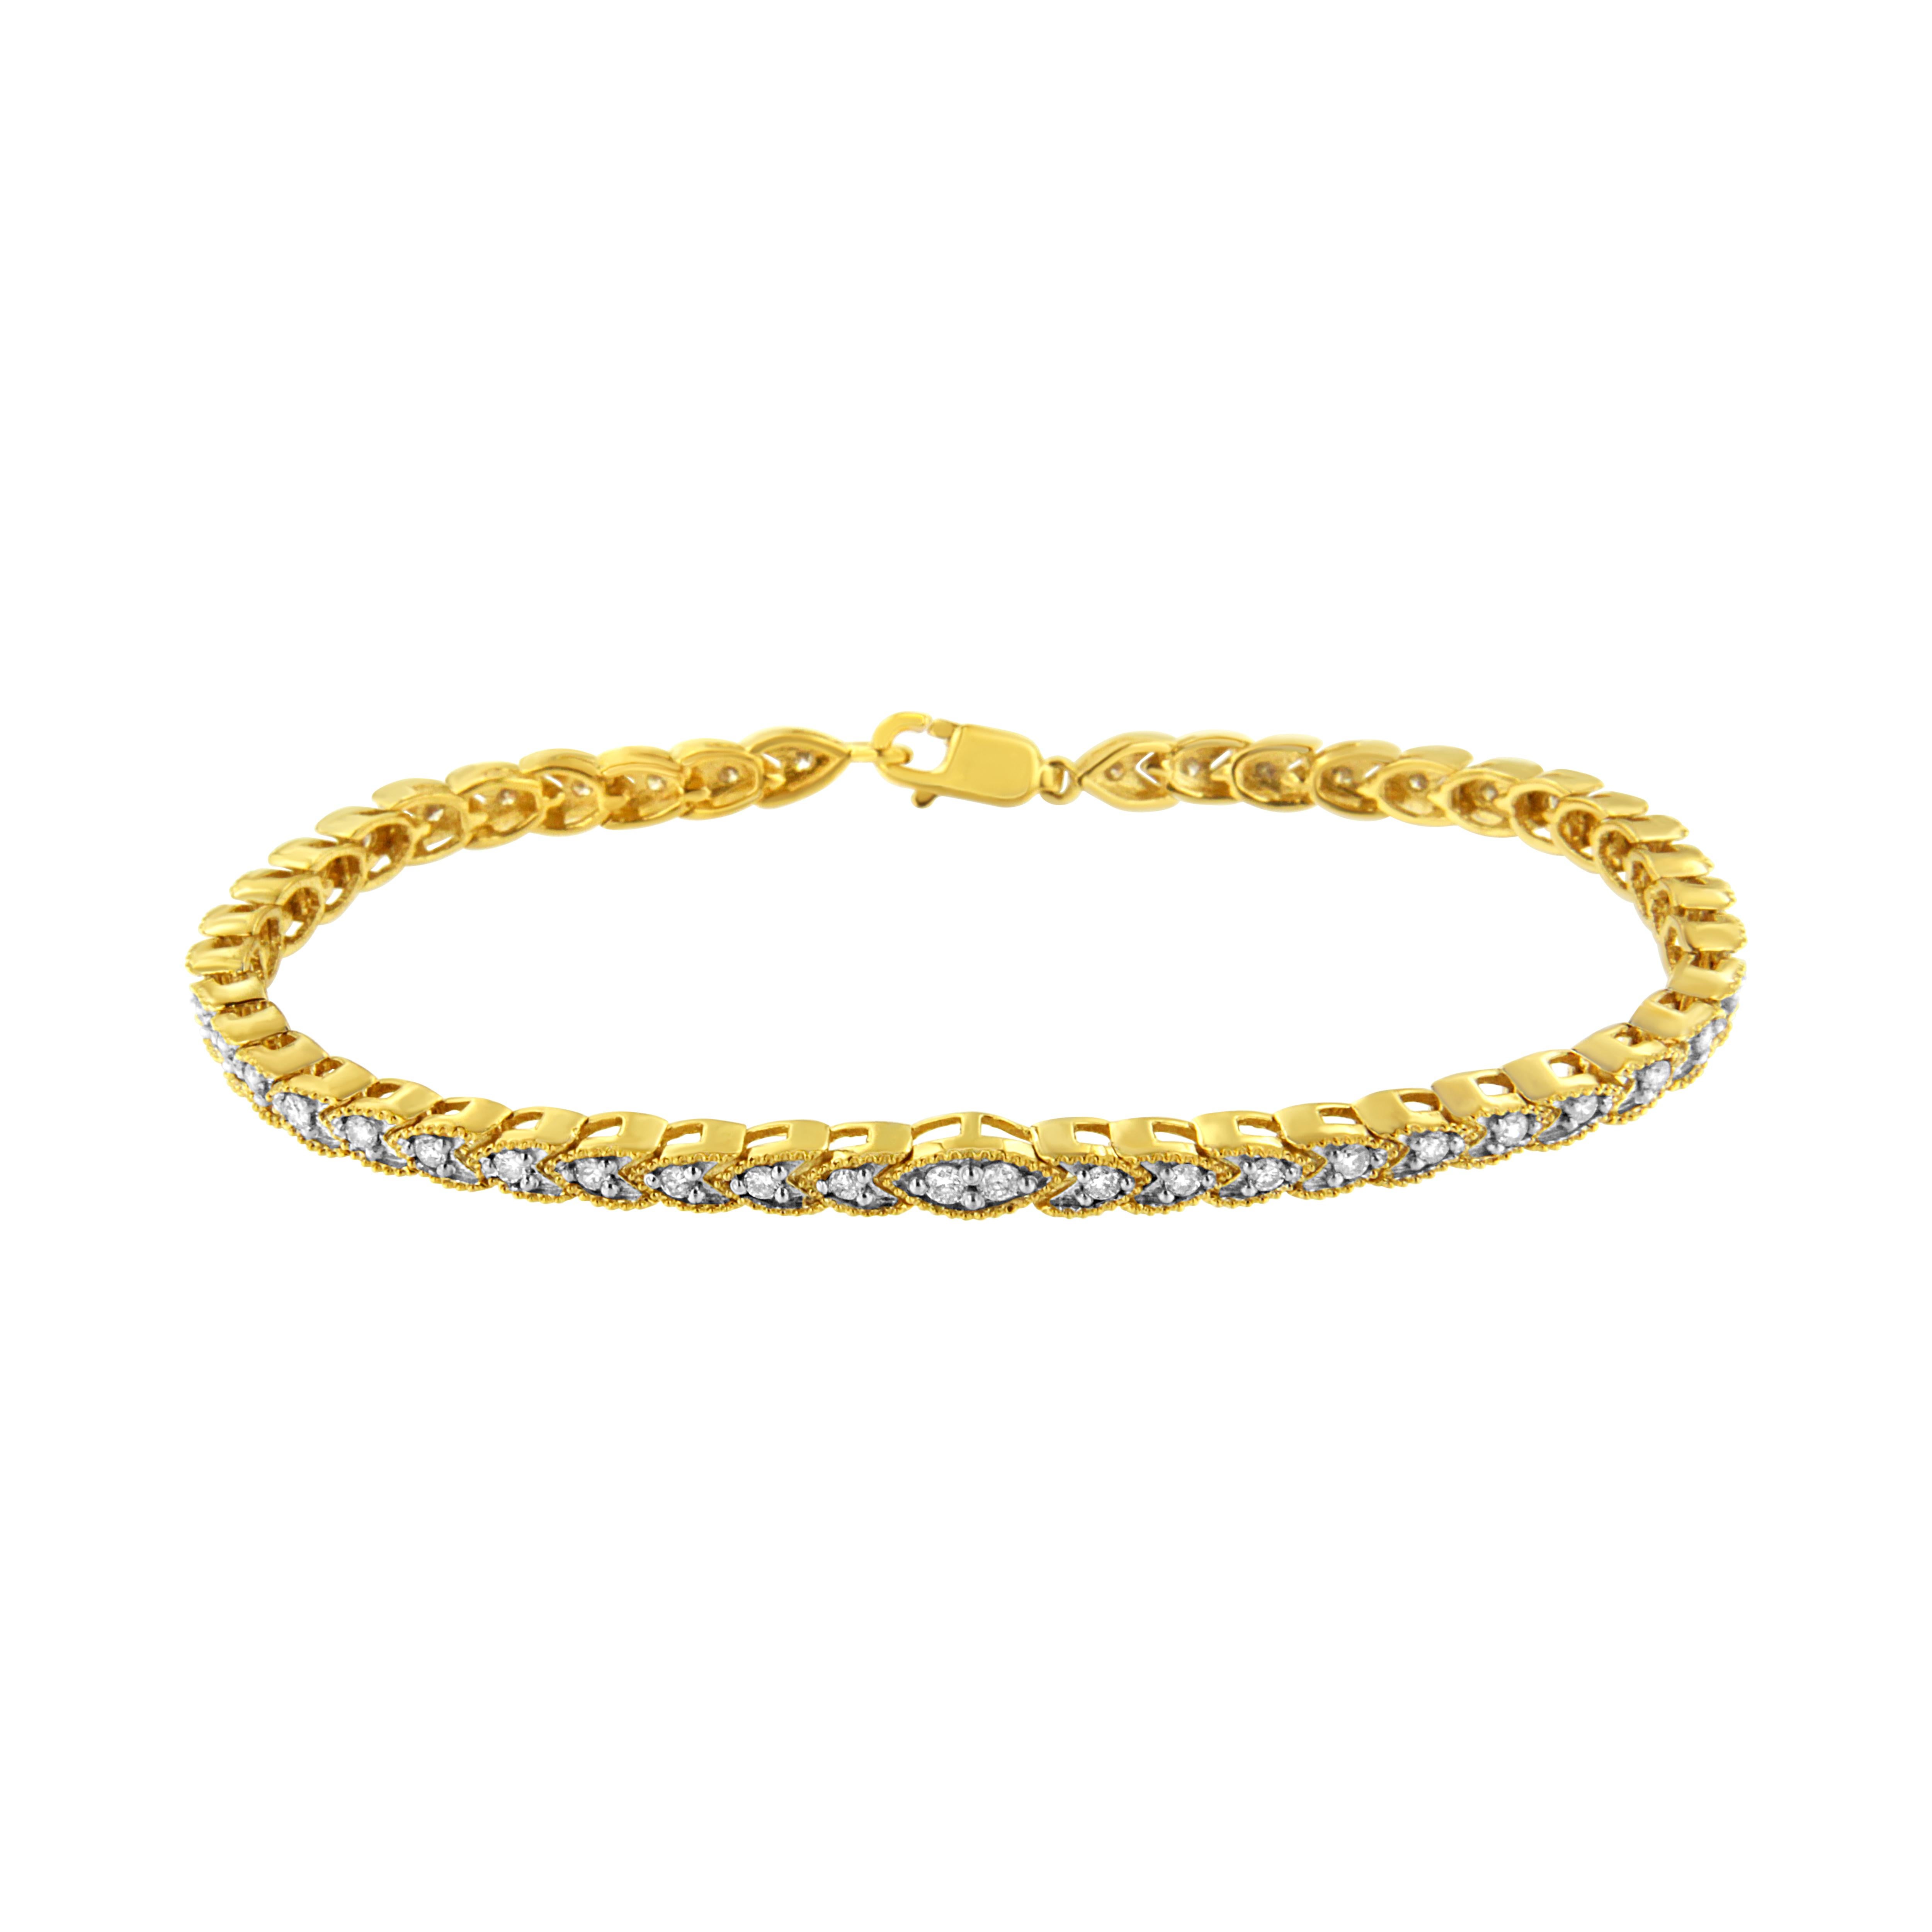 Embellish your wrist with this beautiful 10k yellow gold plated sterling silver link bracelet. At the center of the bracelet there is a almond shaped link inlaid with twinkling round cut diamonds. From this center link, halved links inlaid with